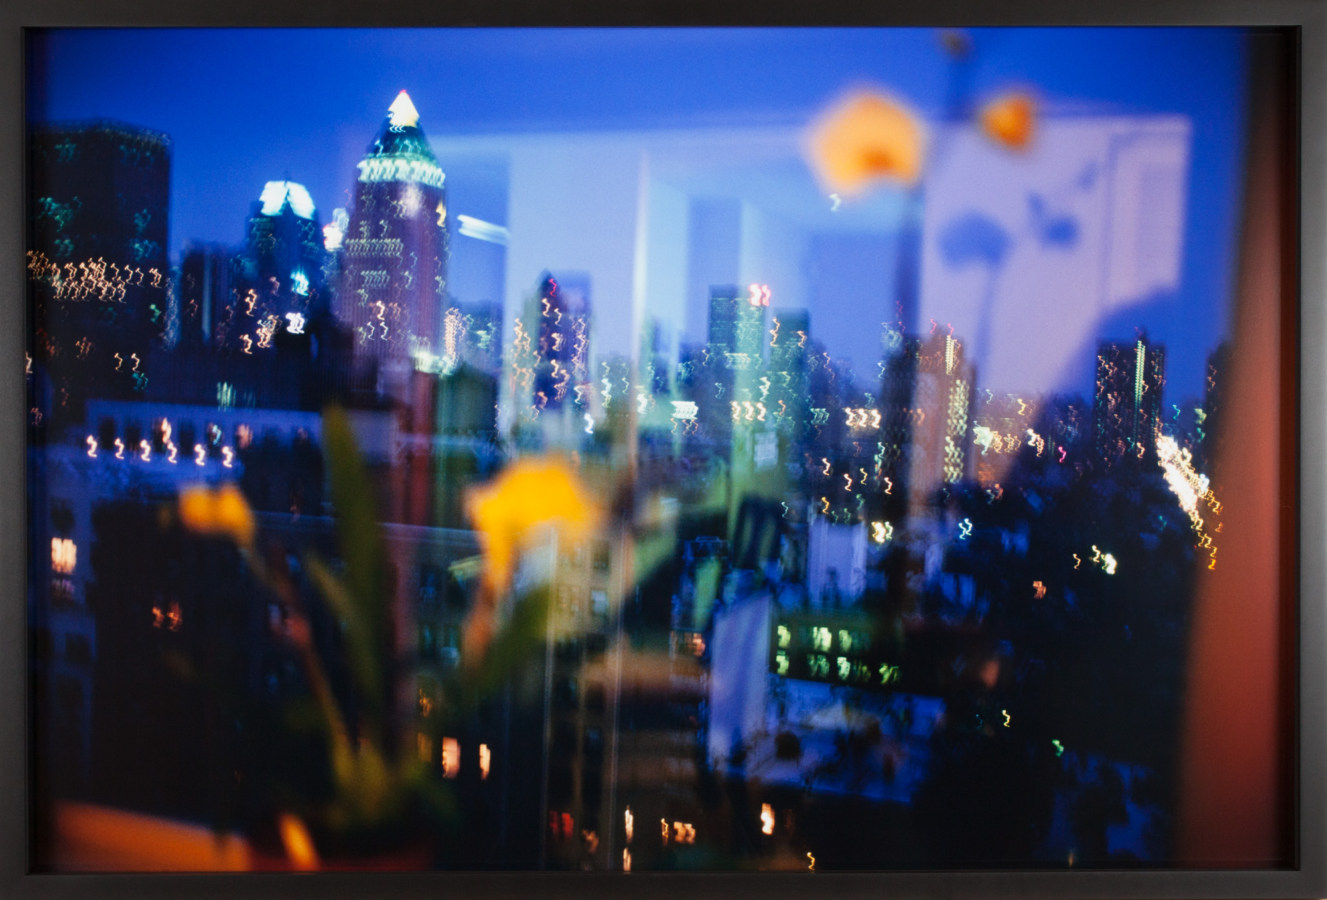 Color photograph from behind a window of an out-of-focus city skyline at night with faint reflections from the room superimposed